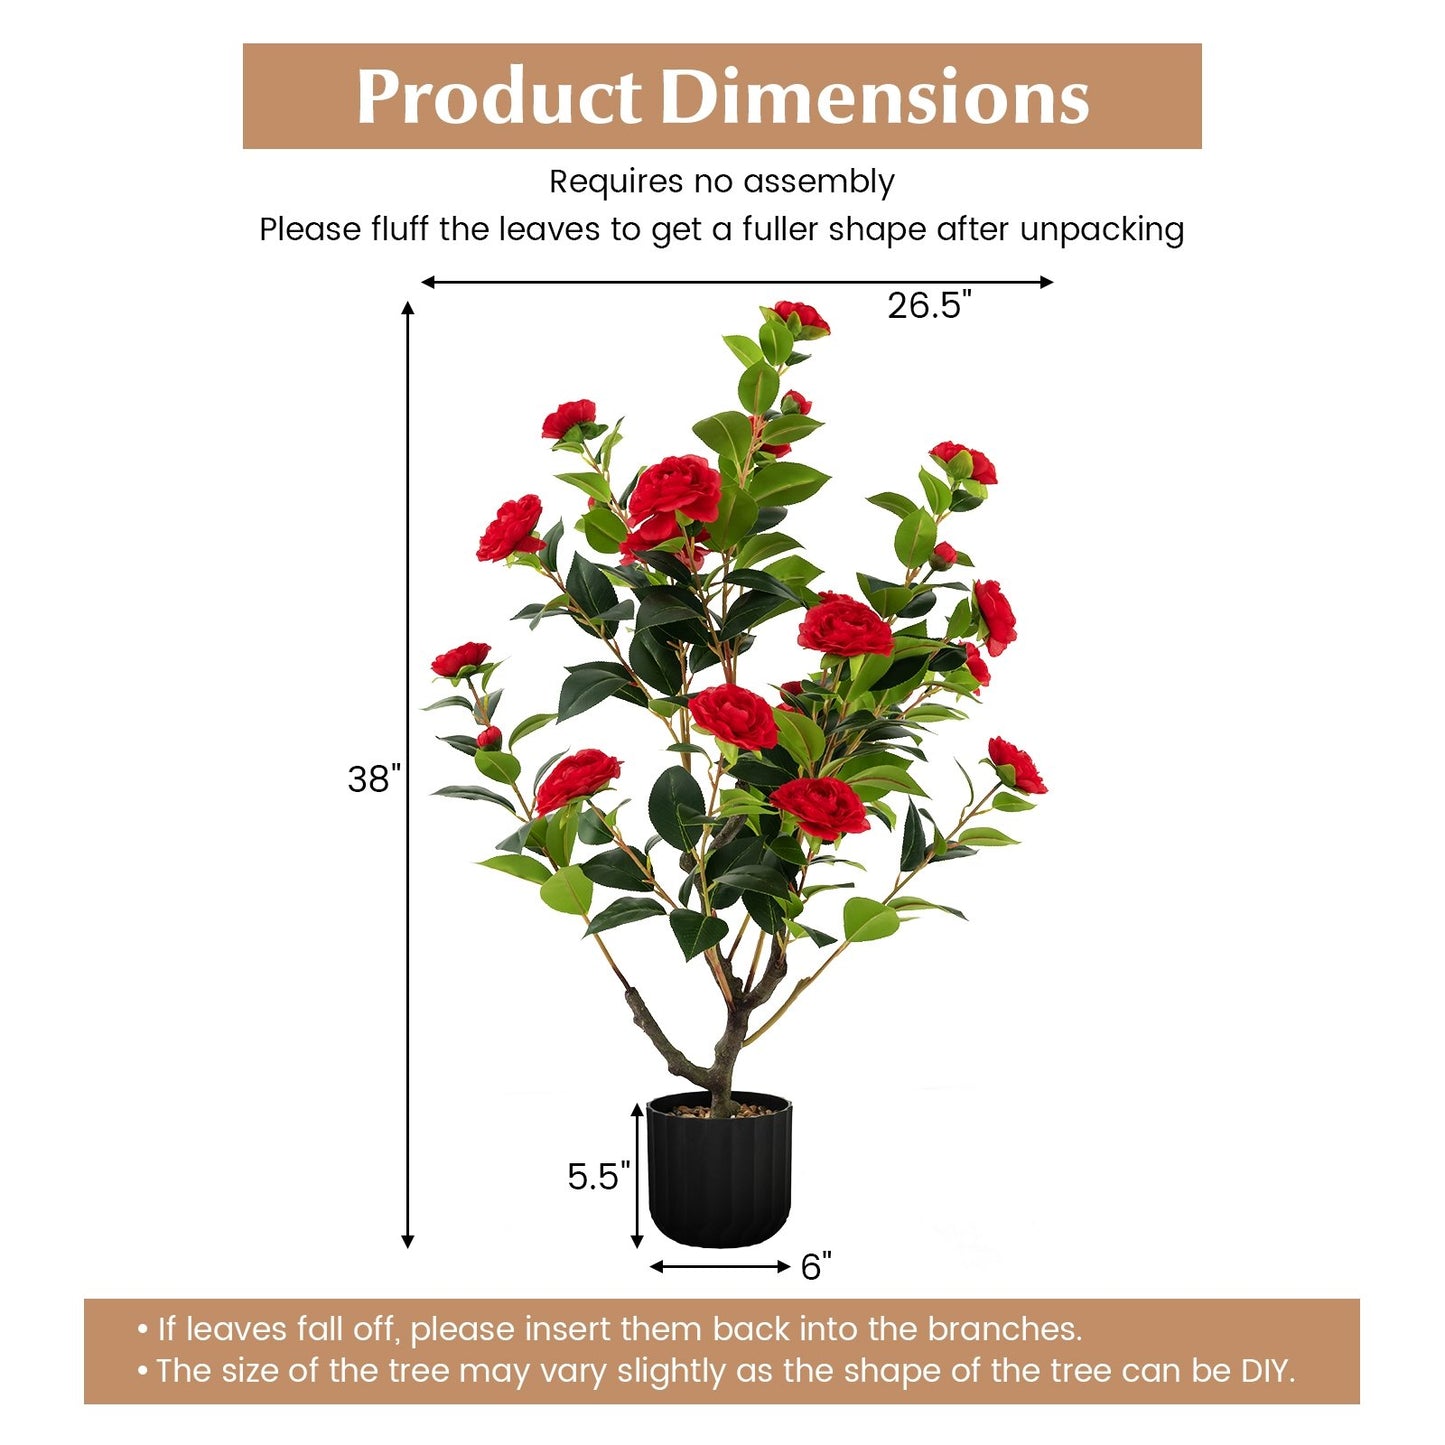 38 Inch Artificial Camellia Tree Faux Flower Plant in Cement Pot 2 Pack, Red